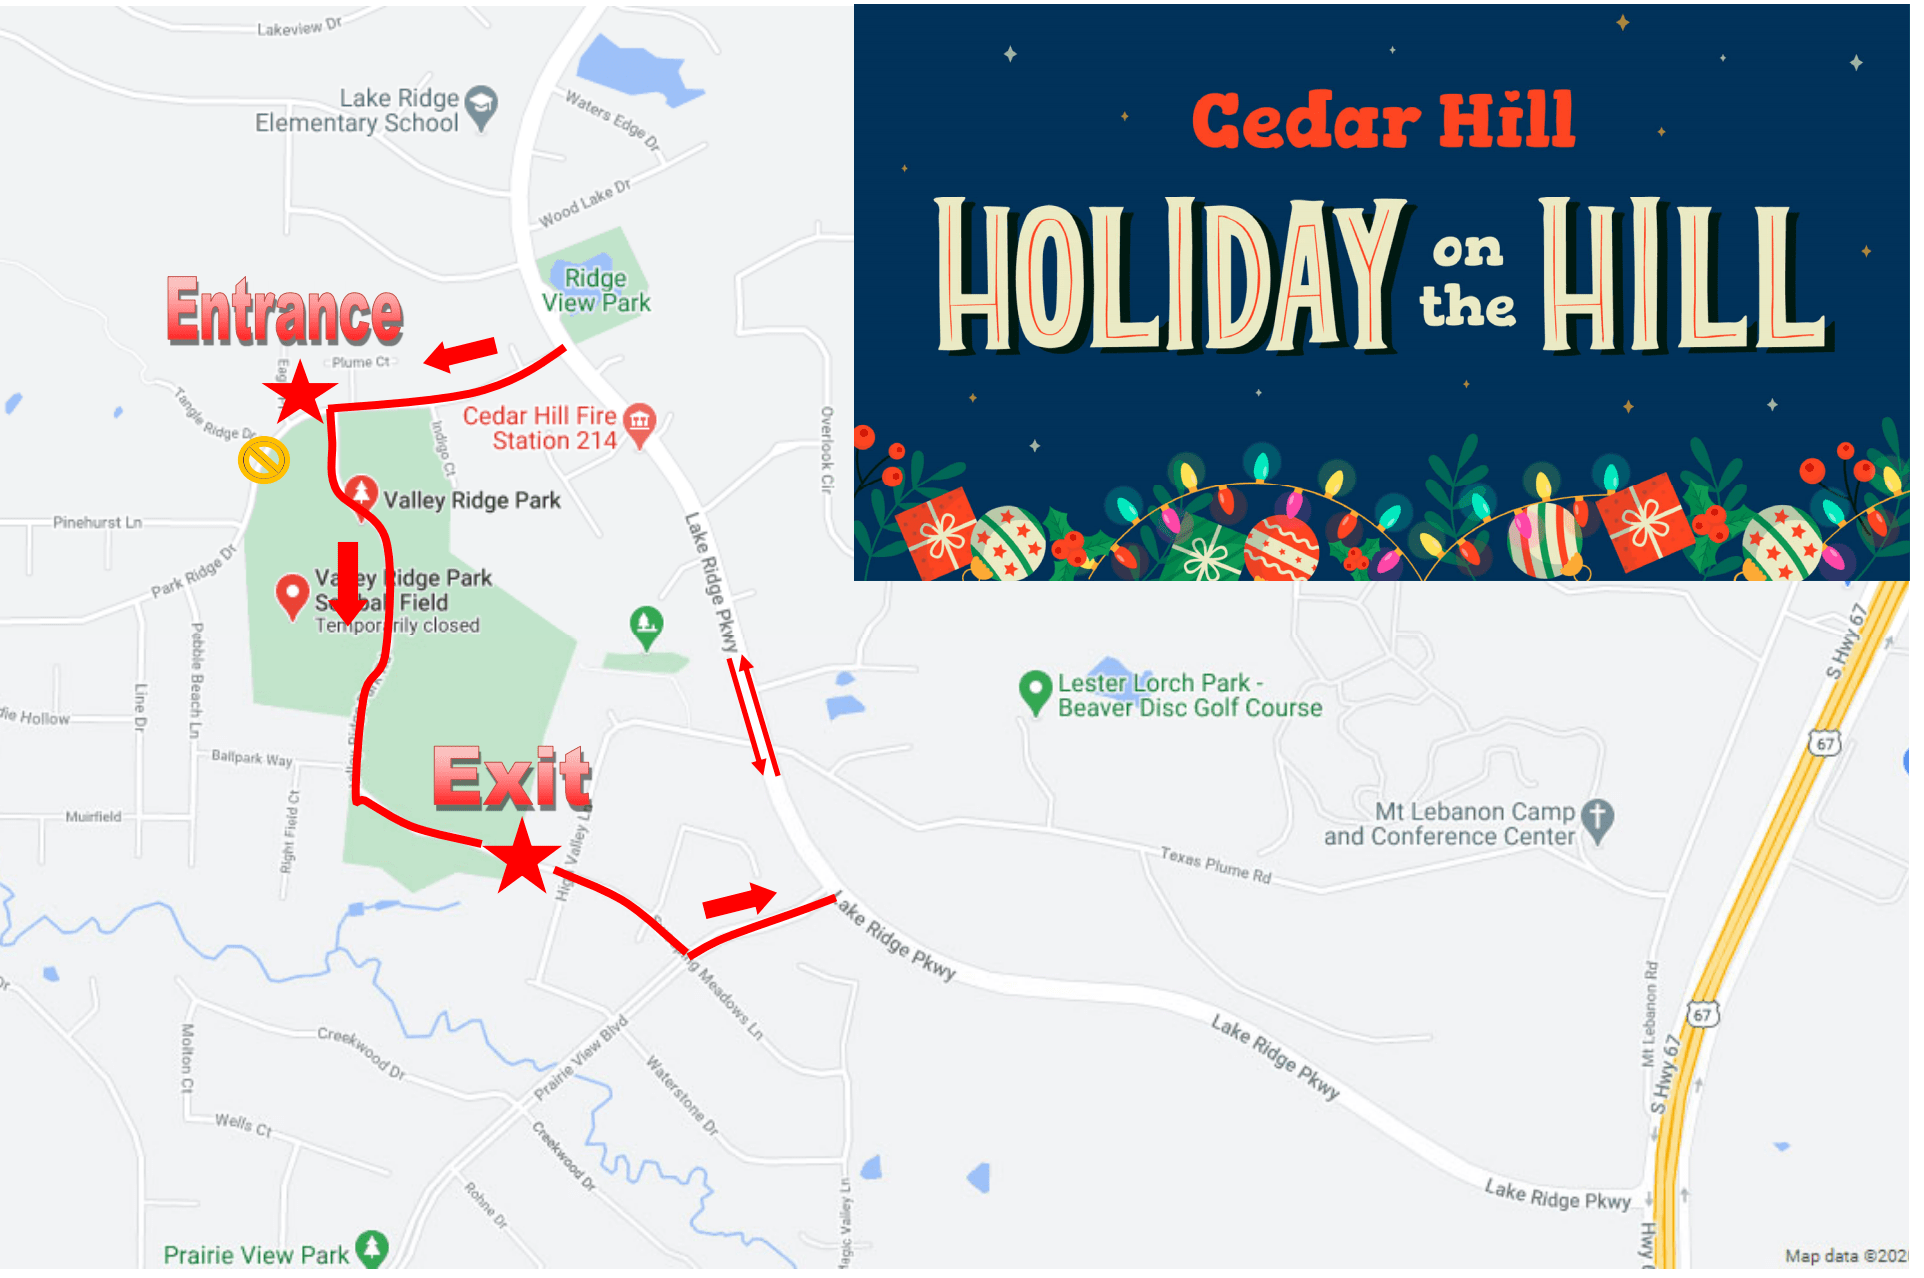 Cedar Hill Holiday on the Hill map